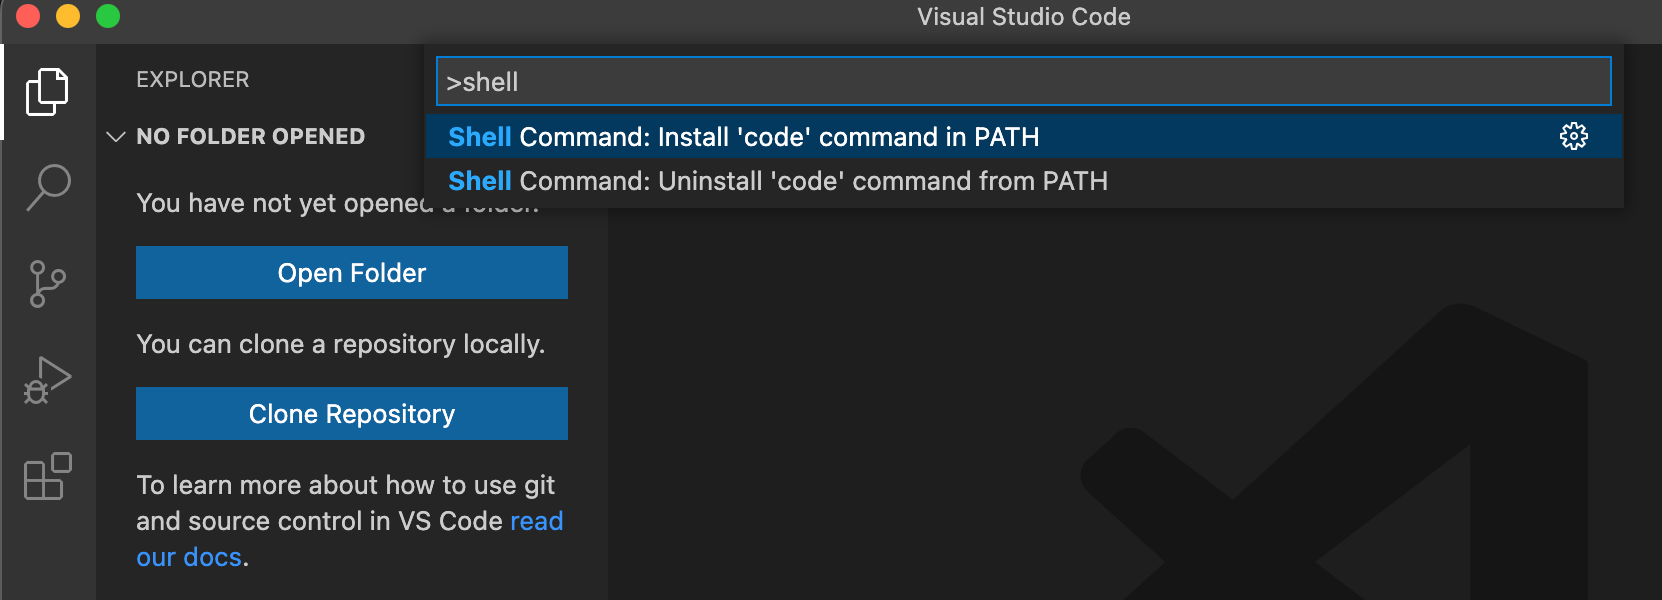 Adding the VS Code executable to your system's PATH variable